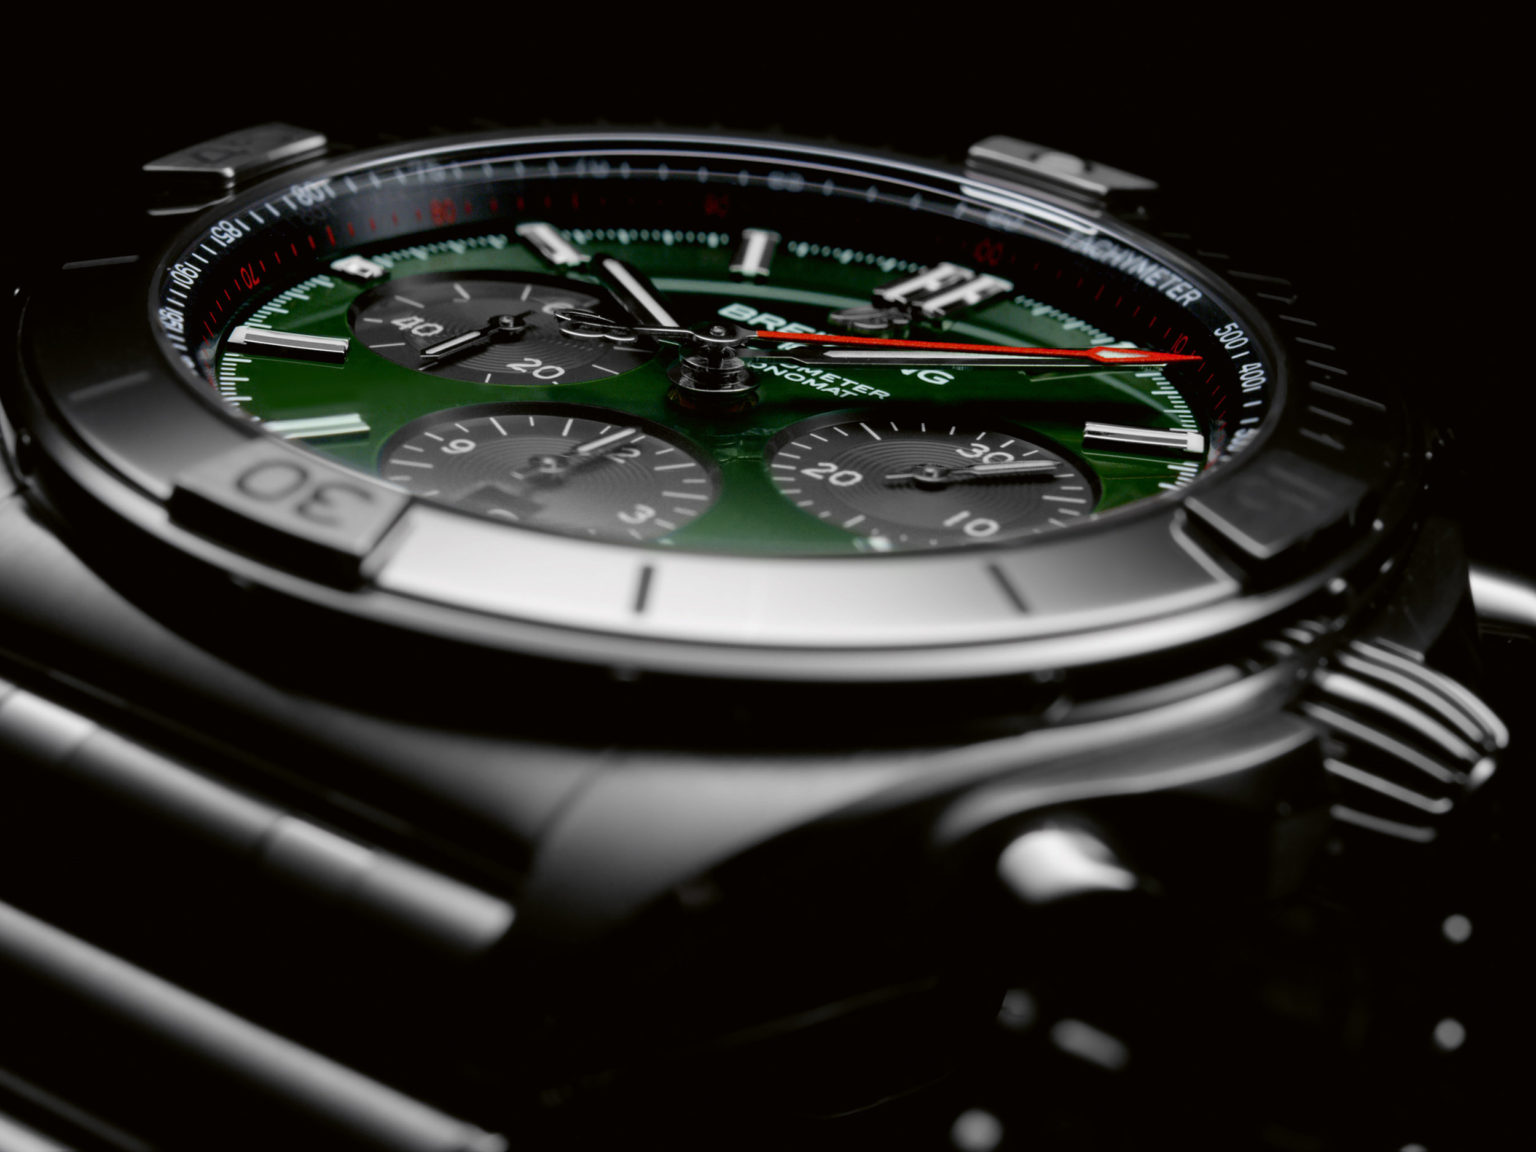 A new watch celebrates the 17th anniversary of Bentley and Breitling working together.